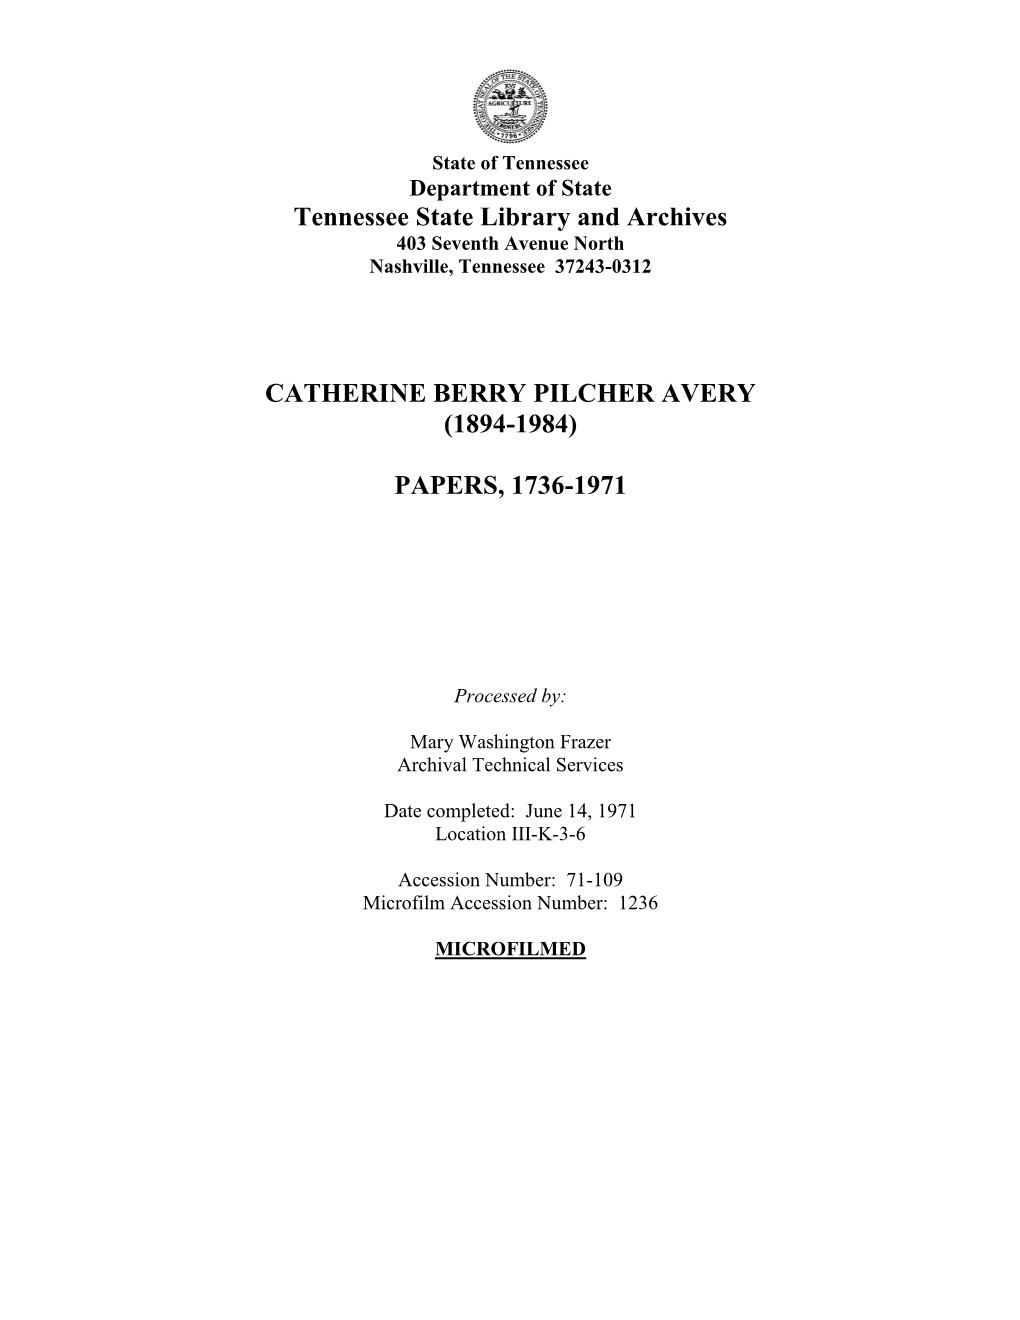 AVERY, Catherine Berry Pilcher Papers